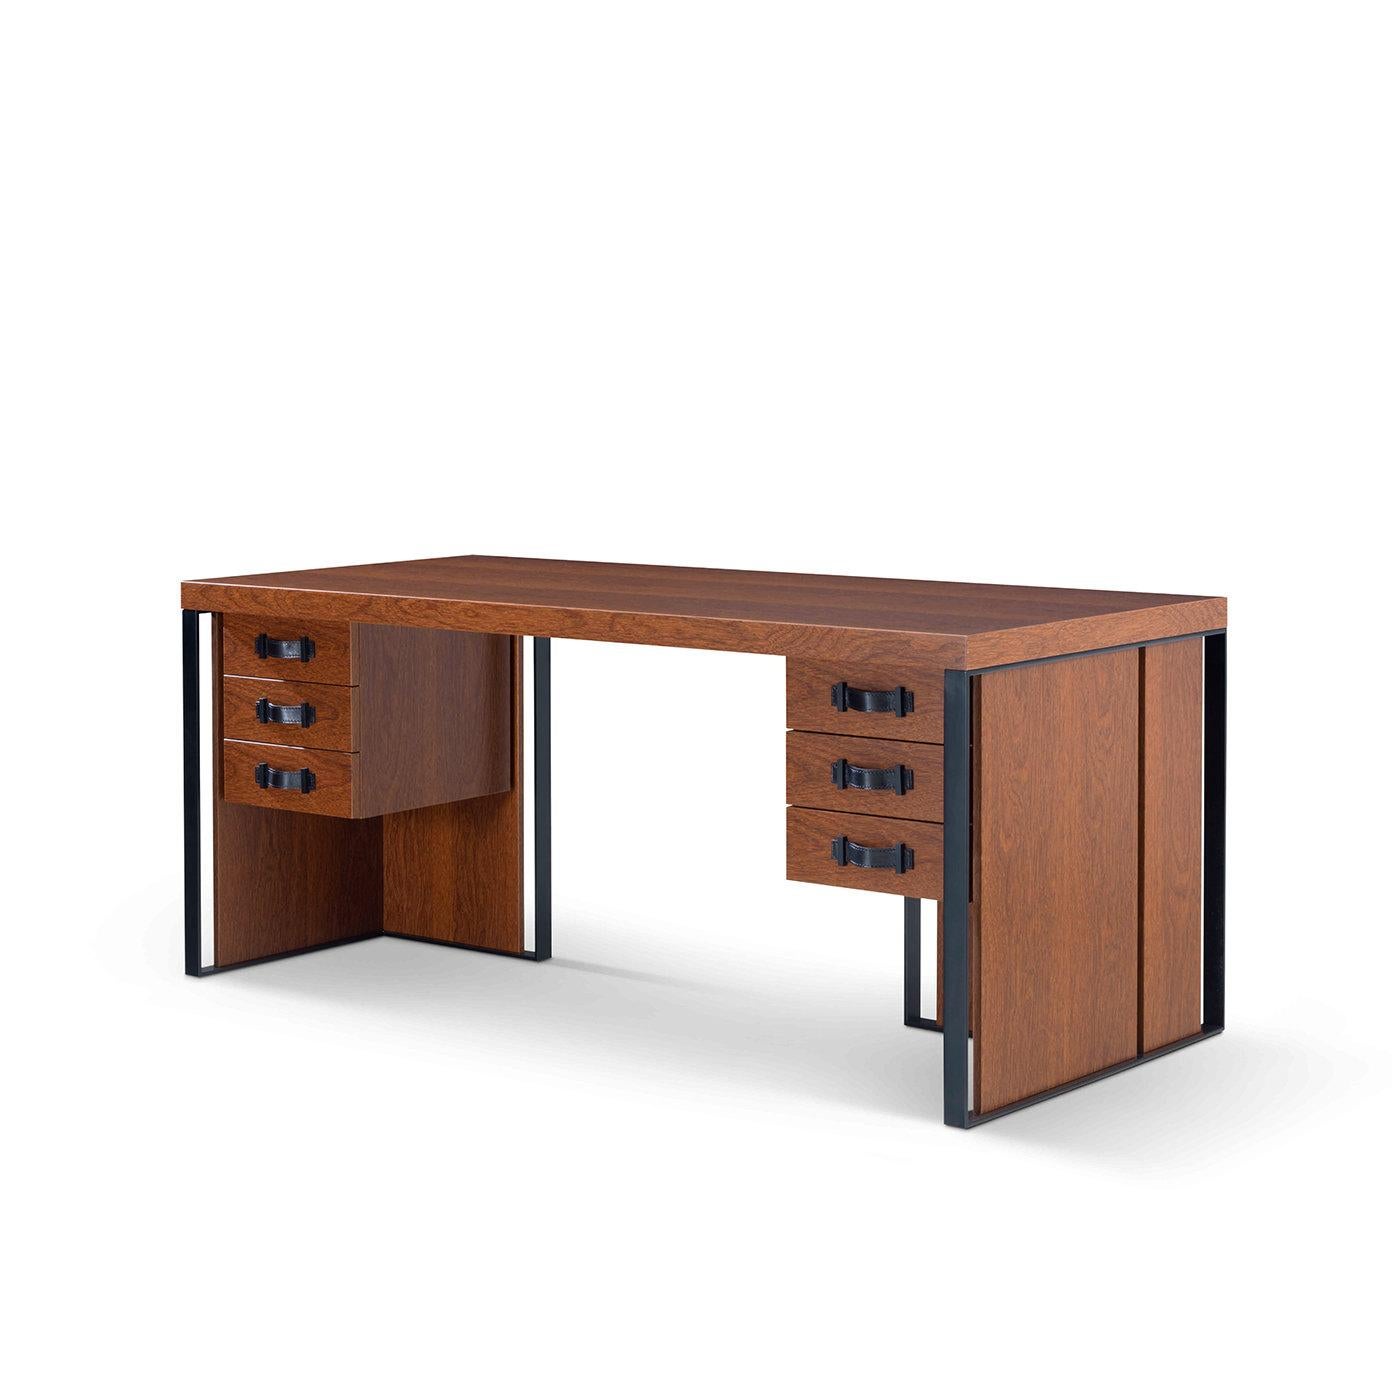 Ideal to bring impeccable, stately style into any private study, this desk merges industrial and sartorial influences. Crafted of solid, honey-hued walnut, the structure is framed by metal profiles varnished in black that outline the two angular